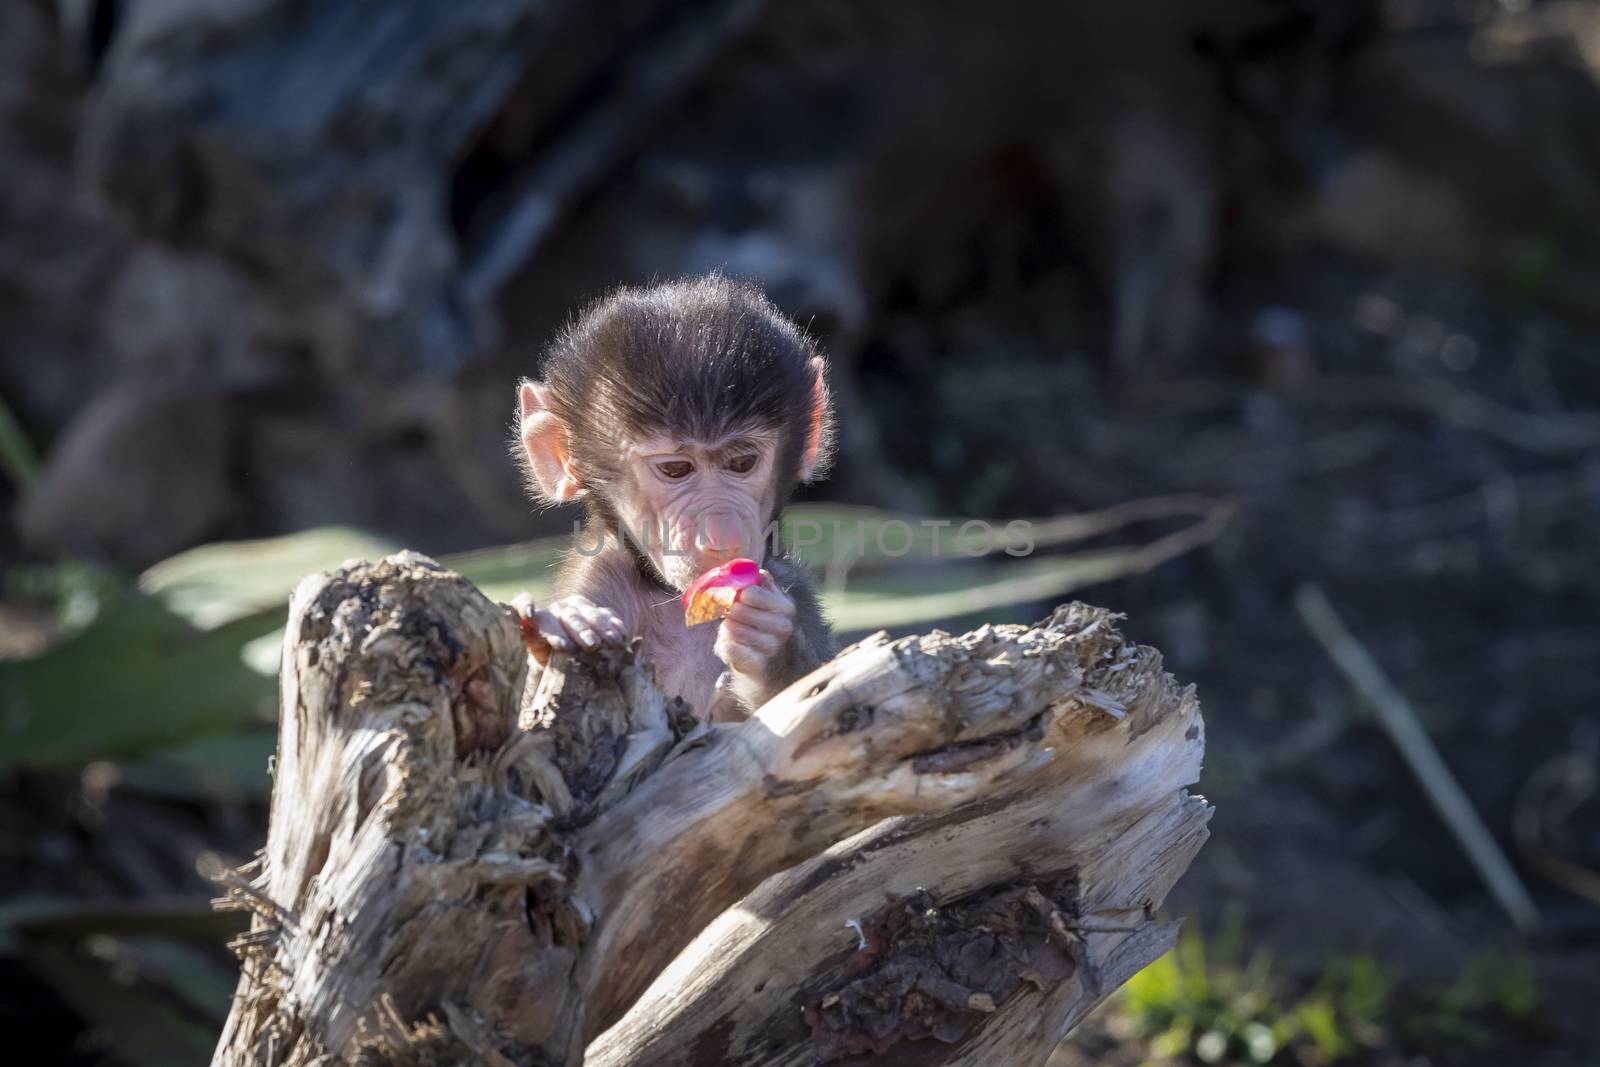 A baby Hamadryas Baboon playing outside on a fallen tree branch